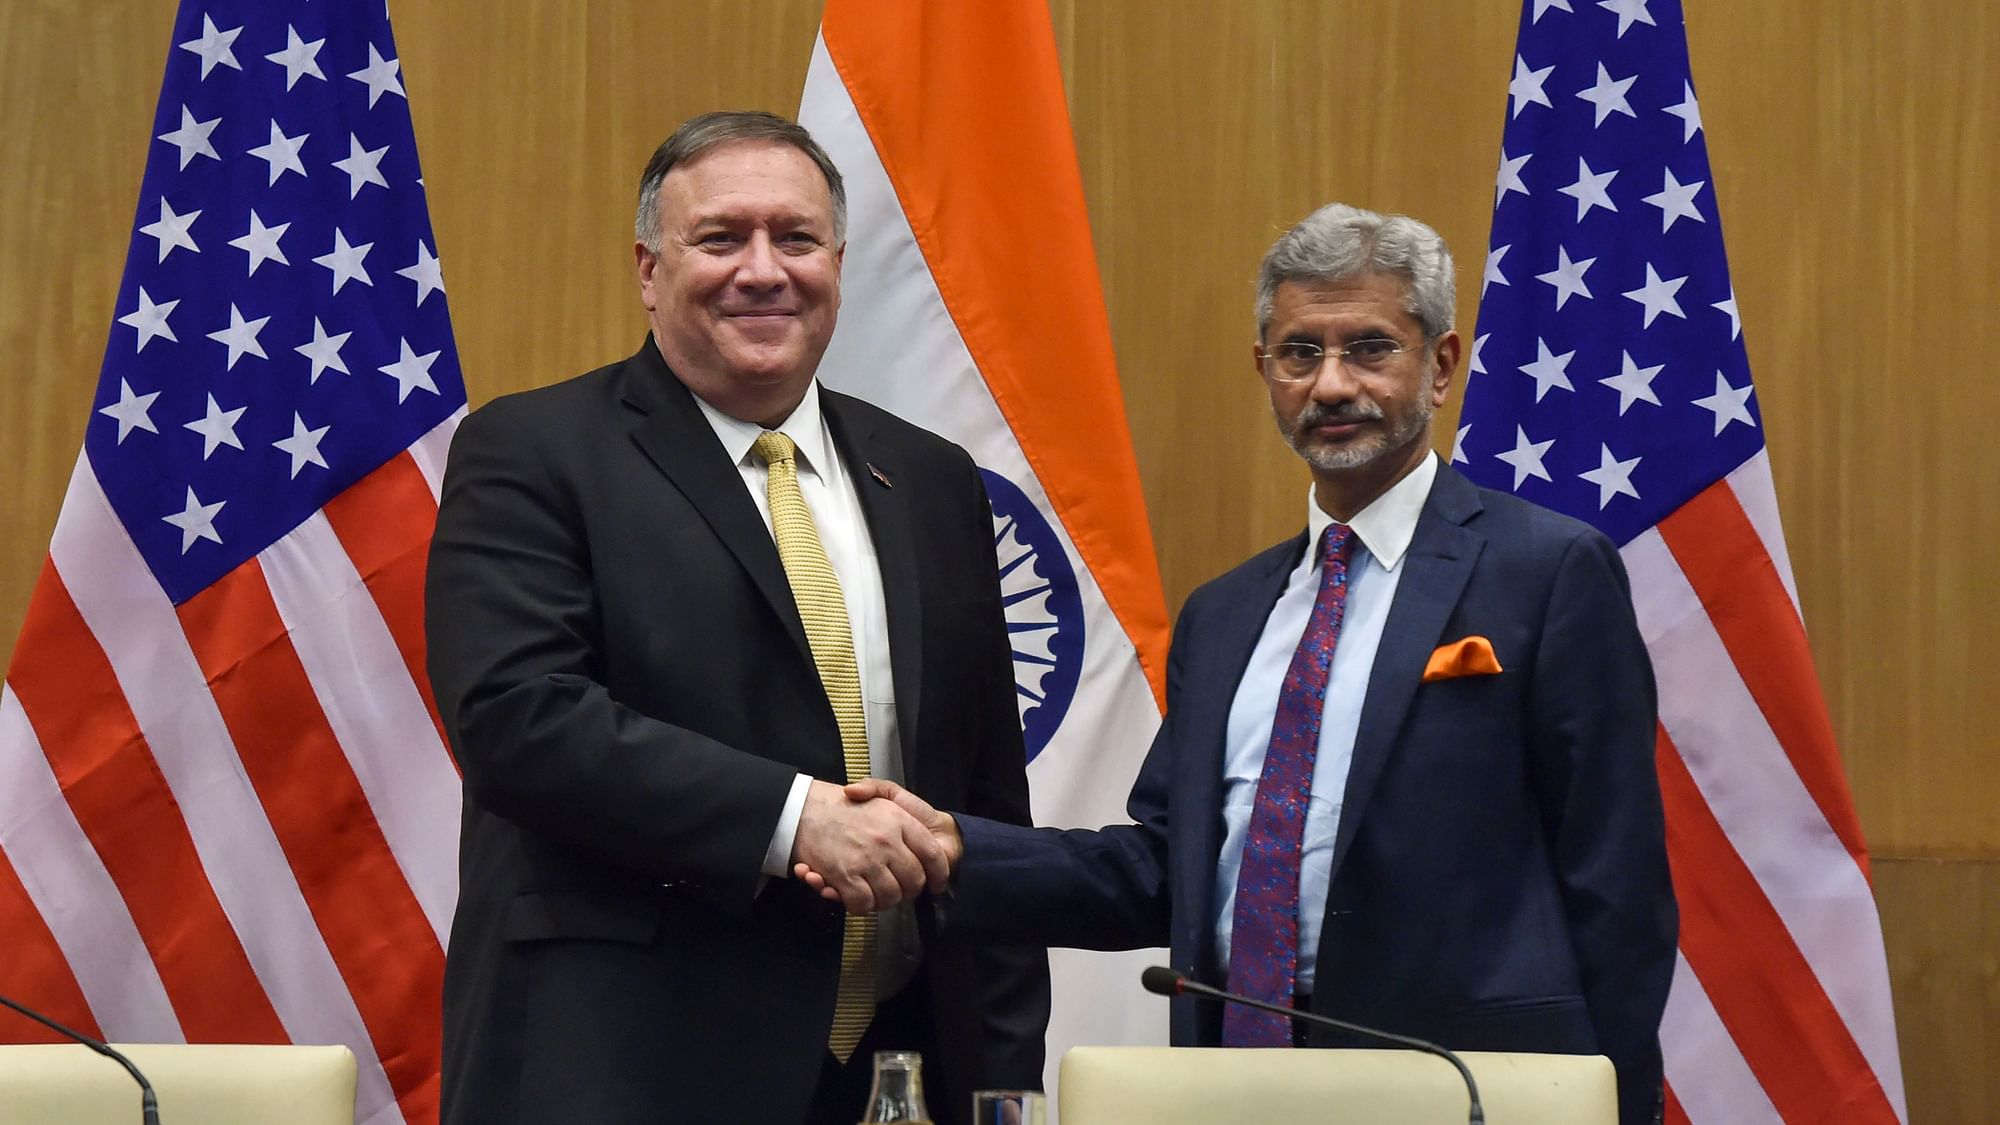 External Affairs Minister S Jaishankar with US Secretary of State Mike Pompeo during a press conference to release their joint statement, in New Delhi.